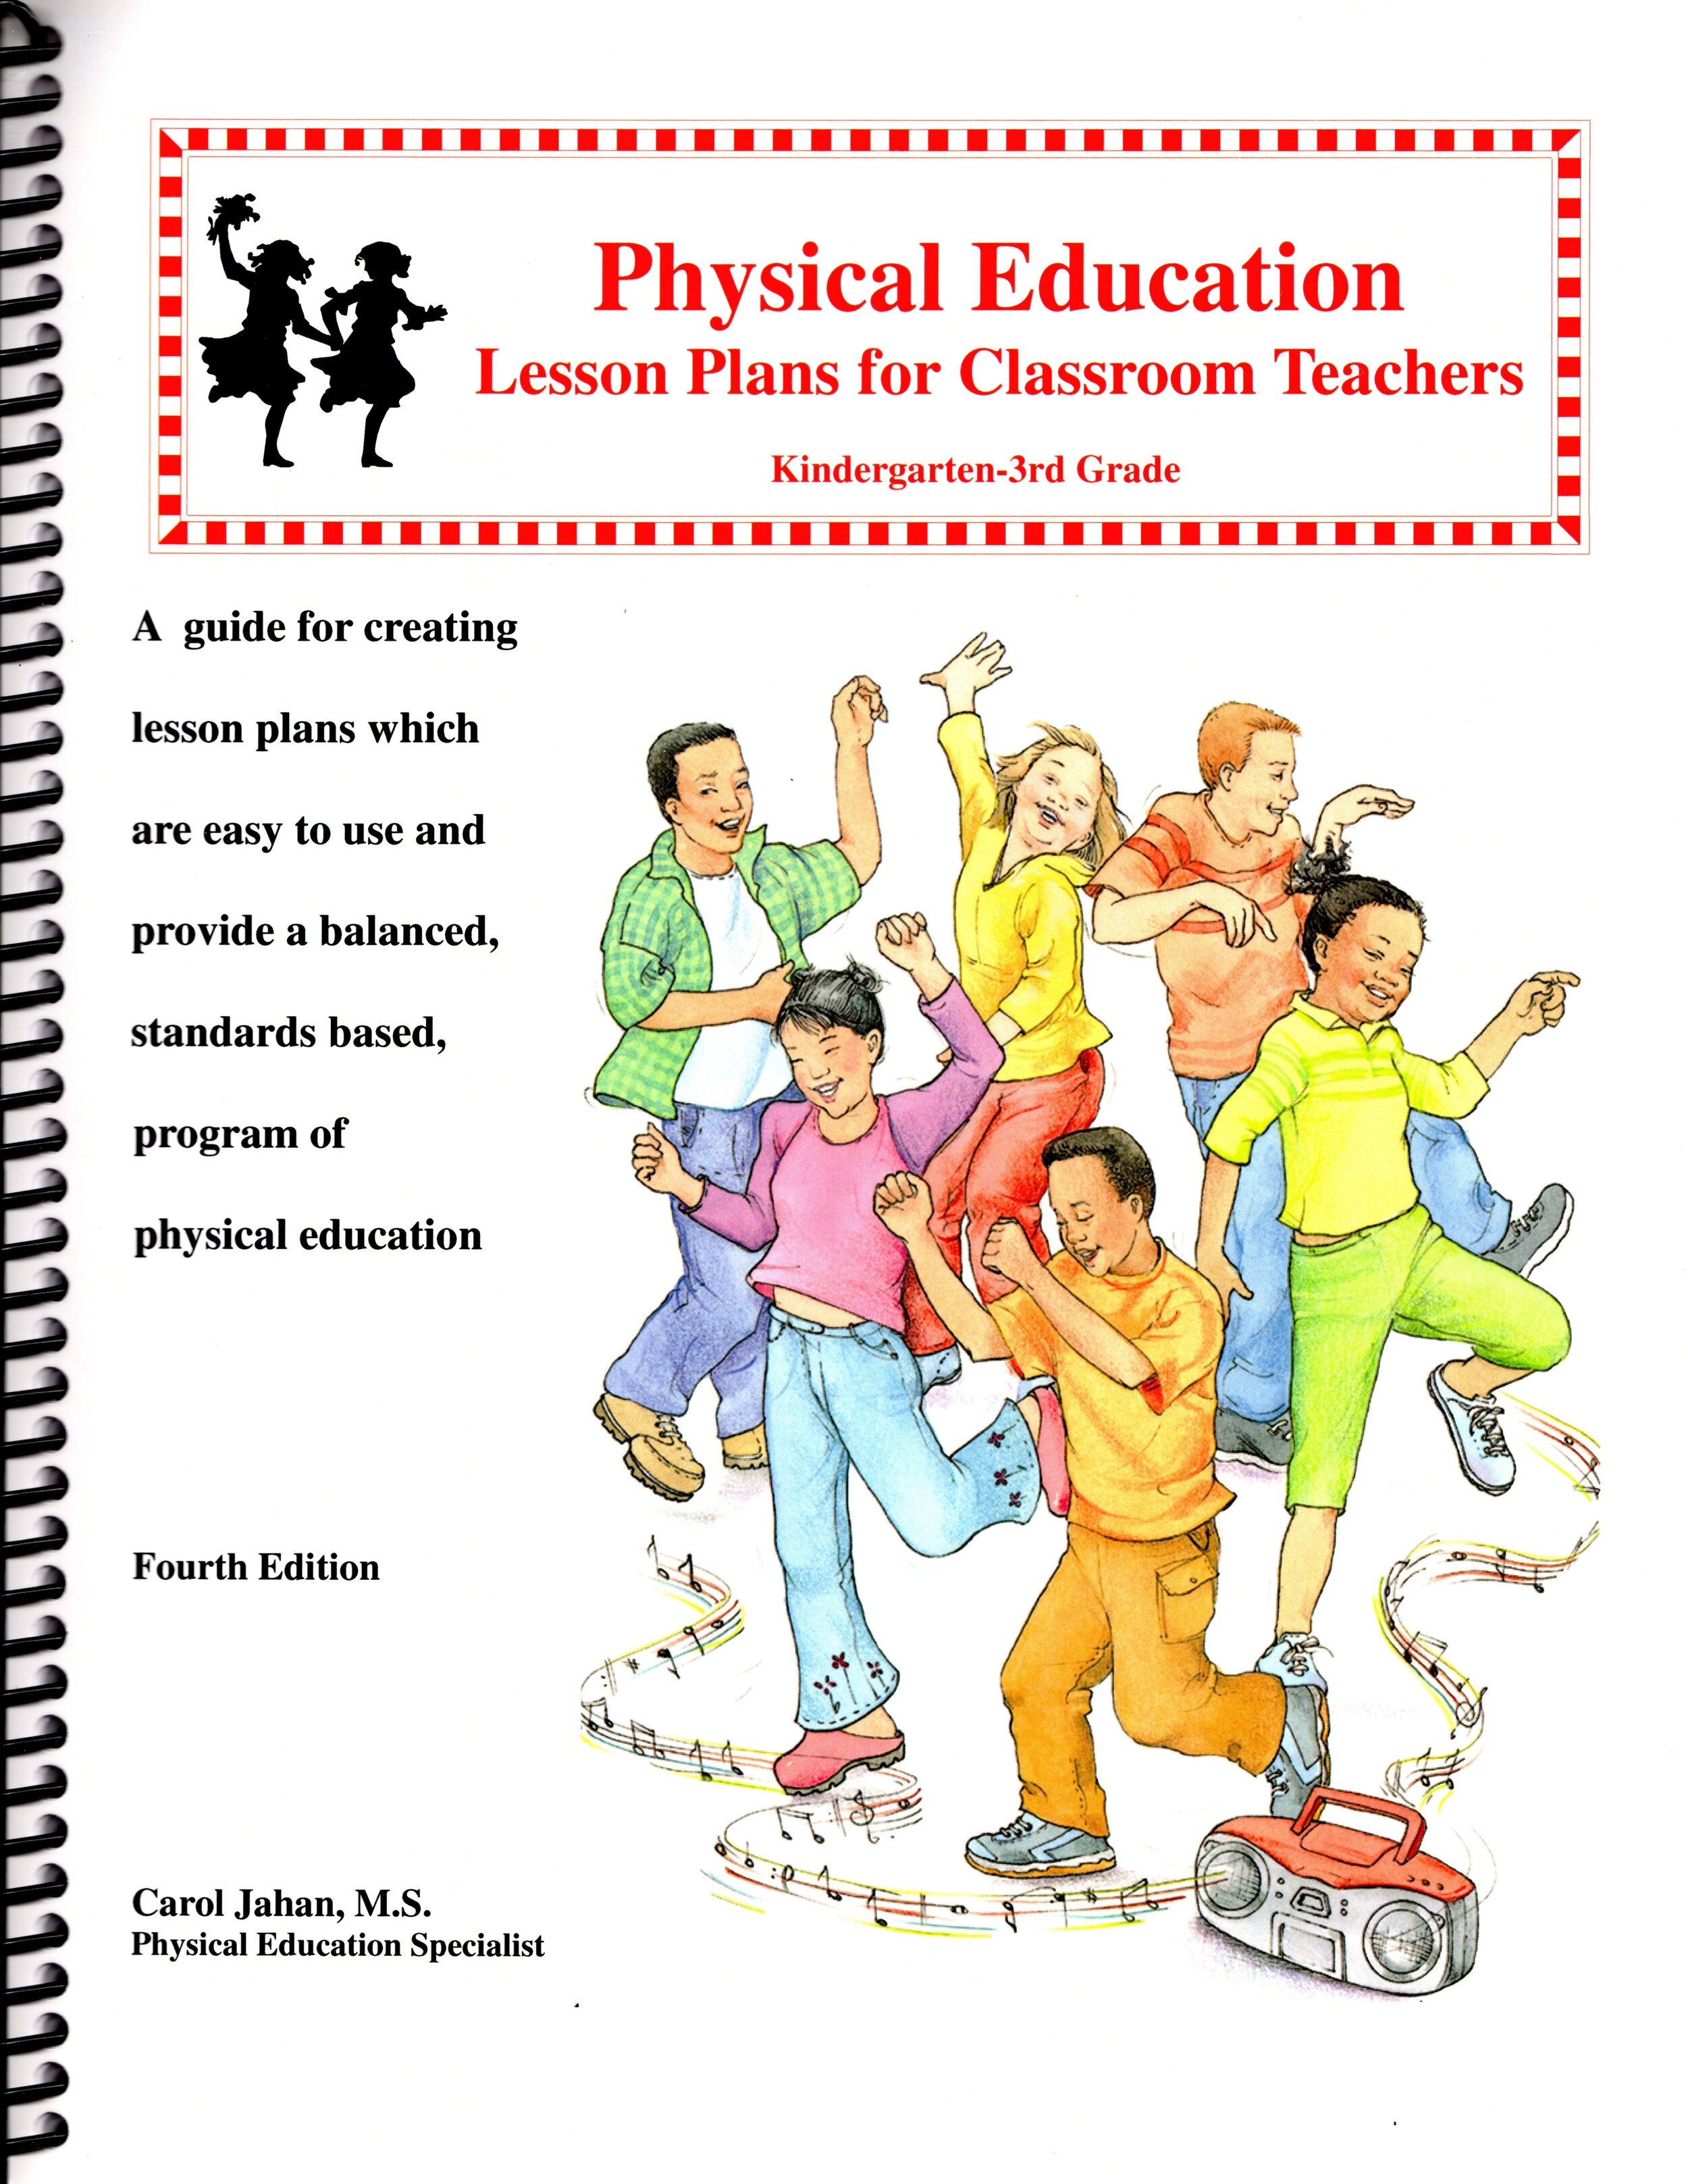 Game on 6 класс. Physical Education Lesson. Physical Education Lessons дети. Physical Education Rules of a game 6 Grade Lesson Plan. Physical Classroom.